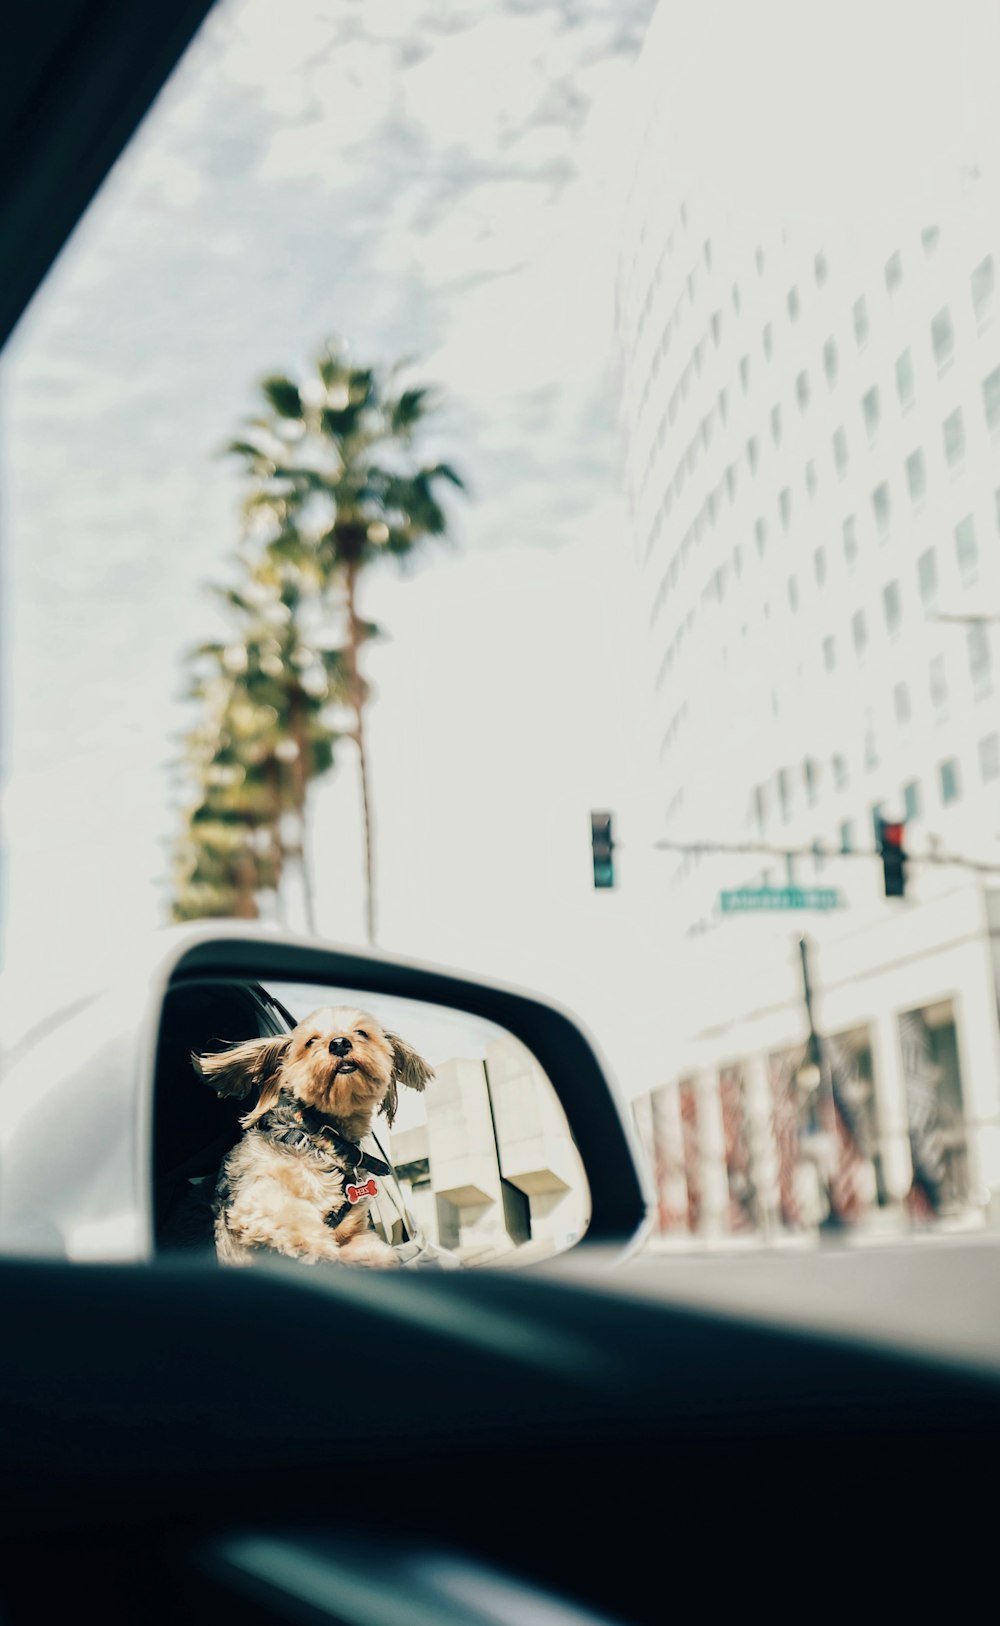 view of dog through vehicle side mirror